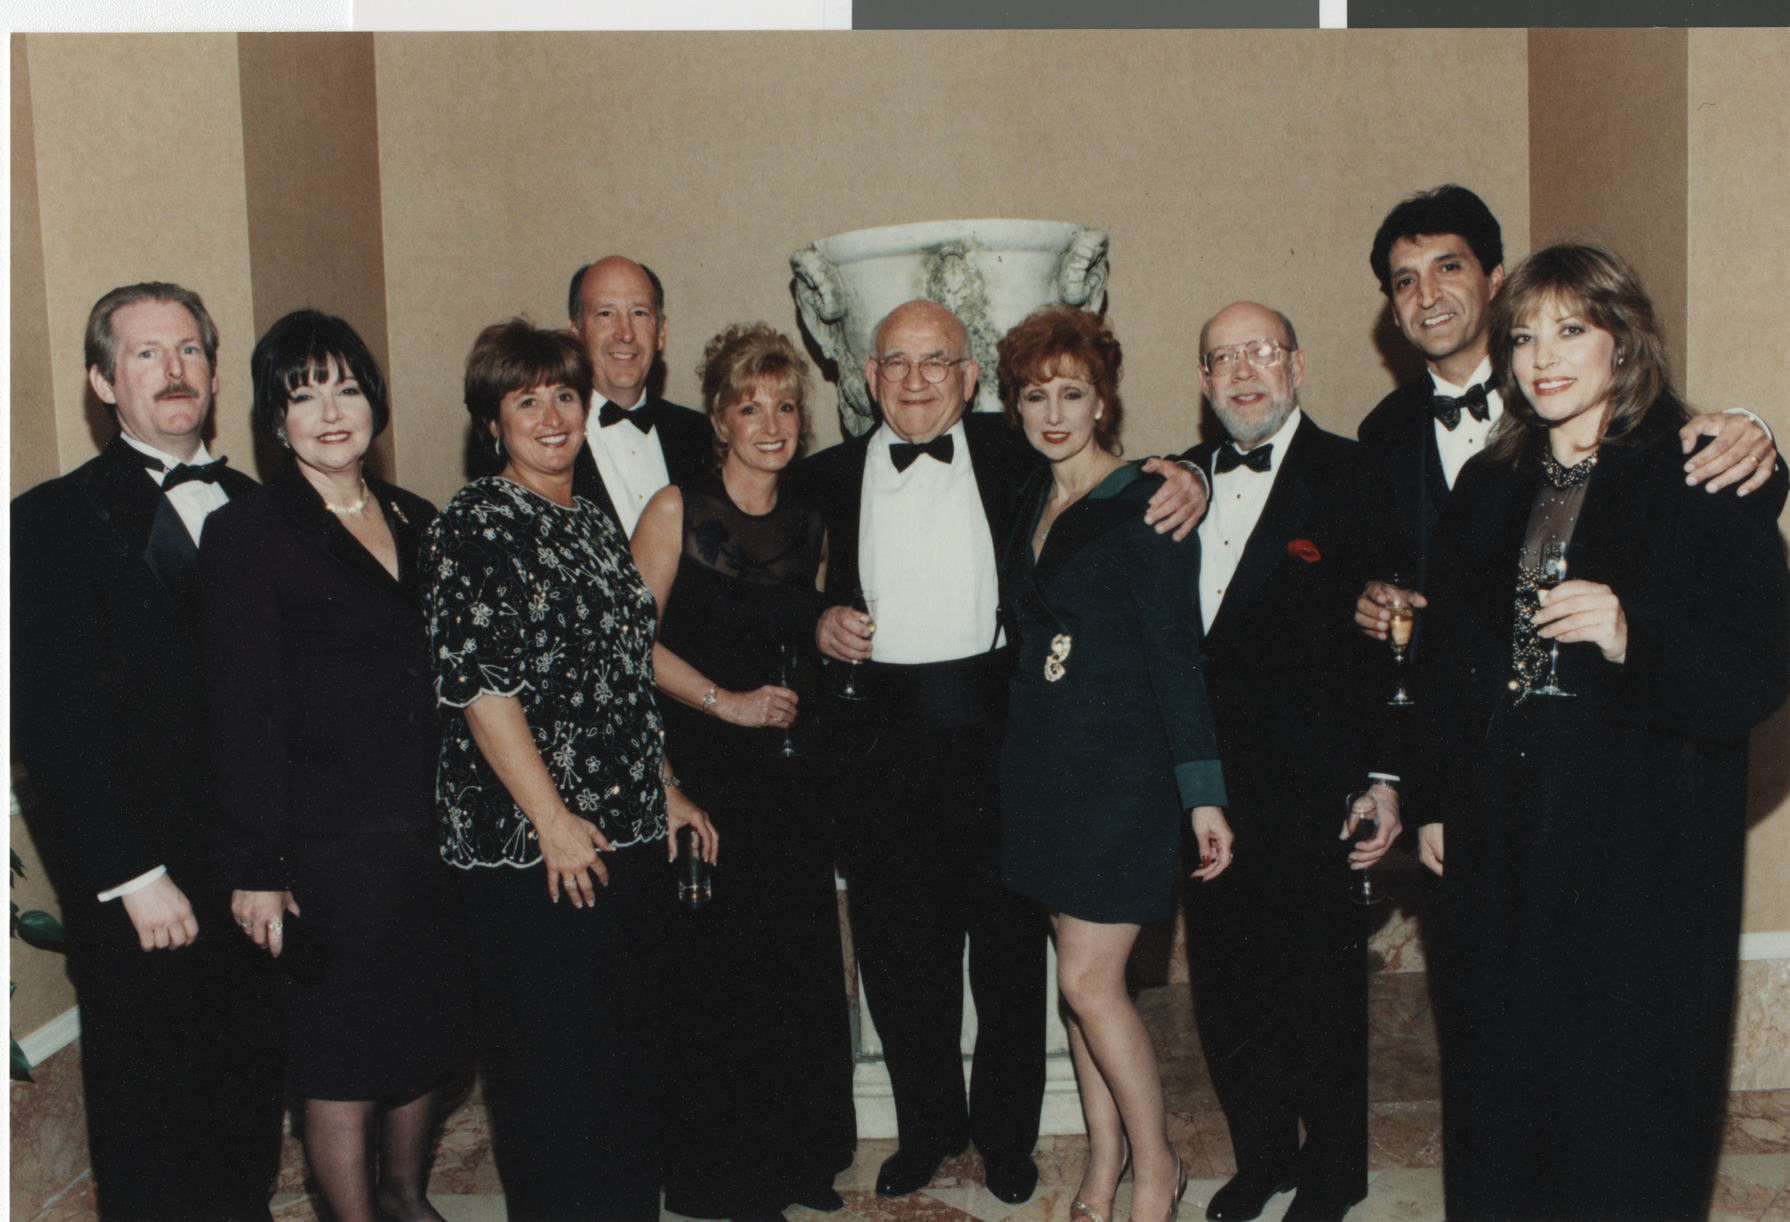 Photograph of event hosted by the Jewish Federation of Las Vegas, 1998-2000